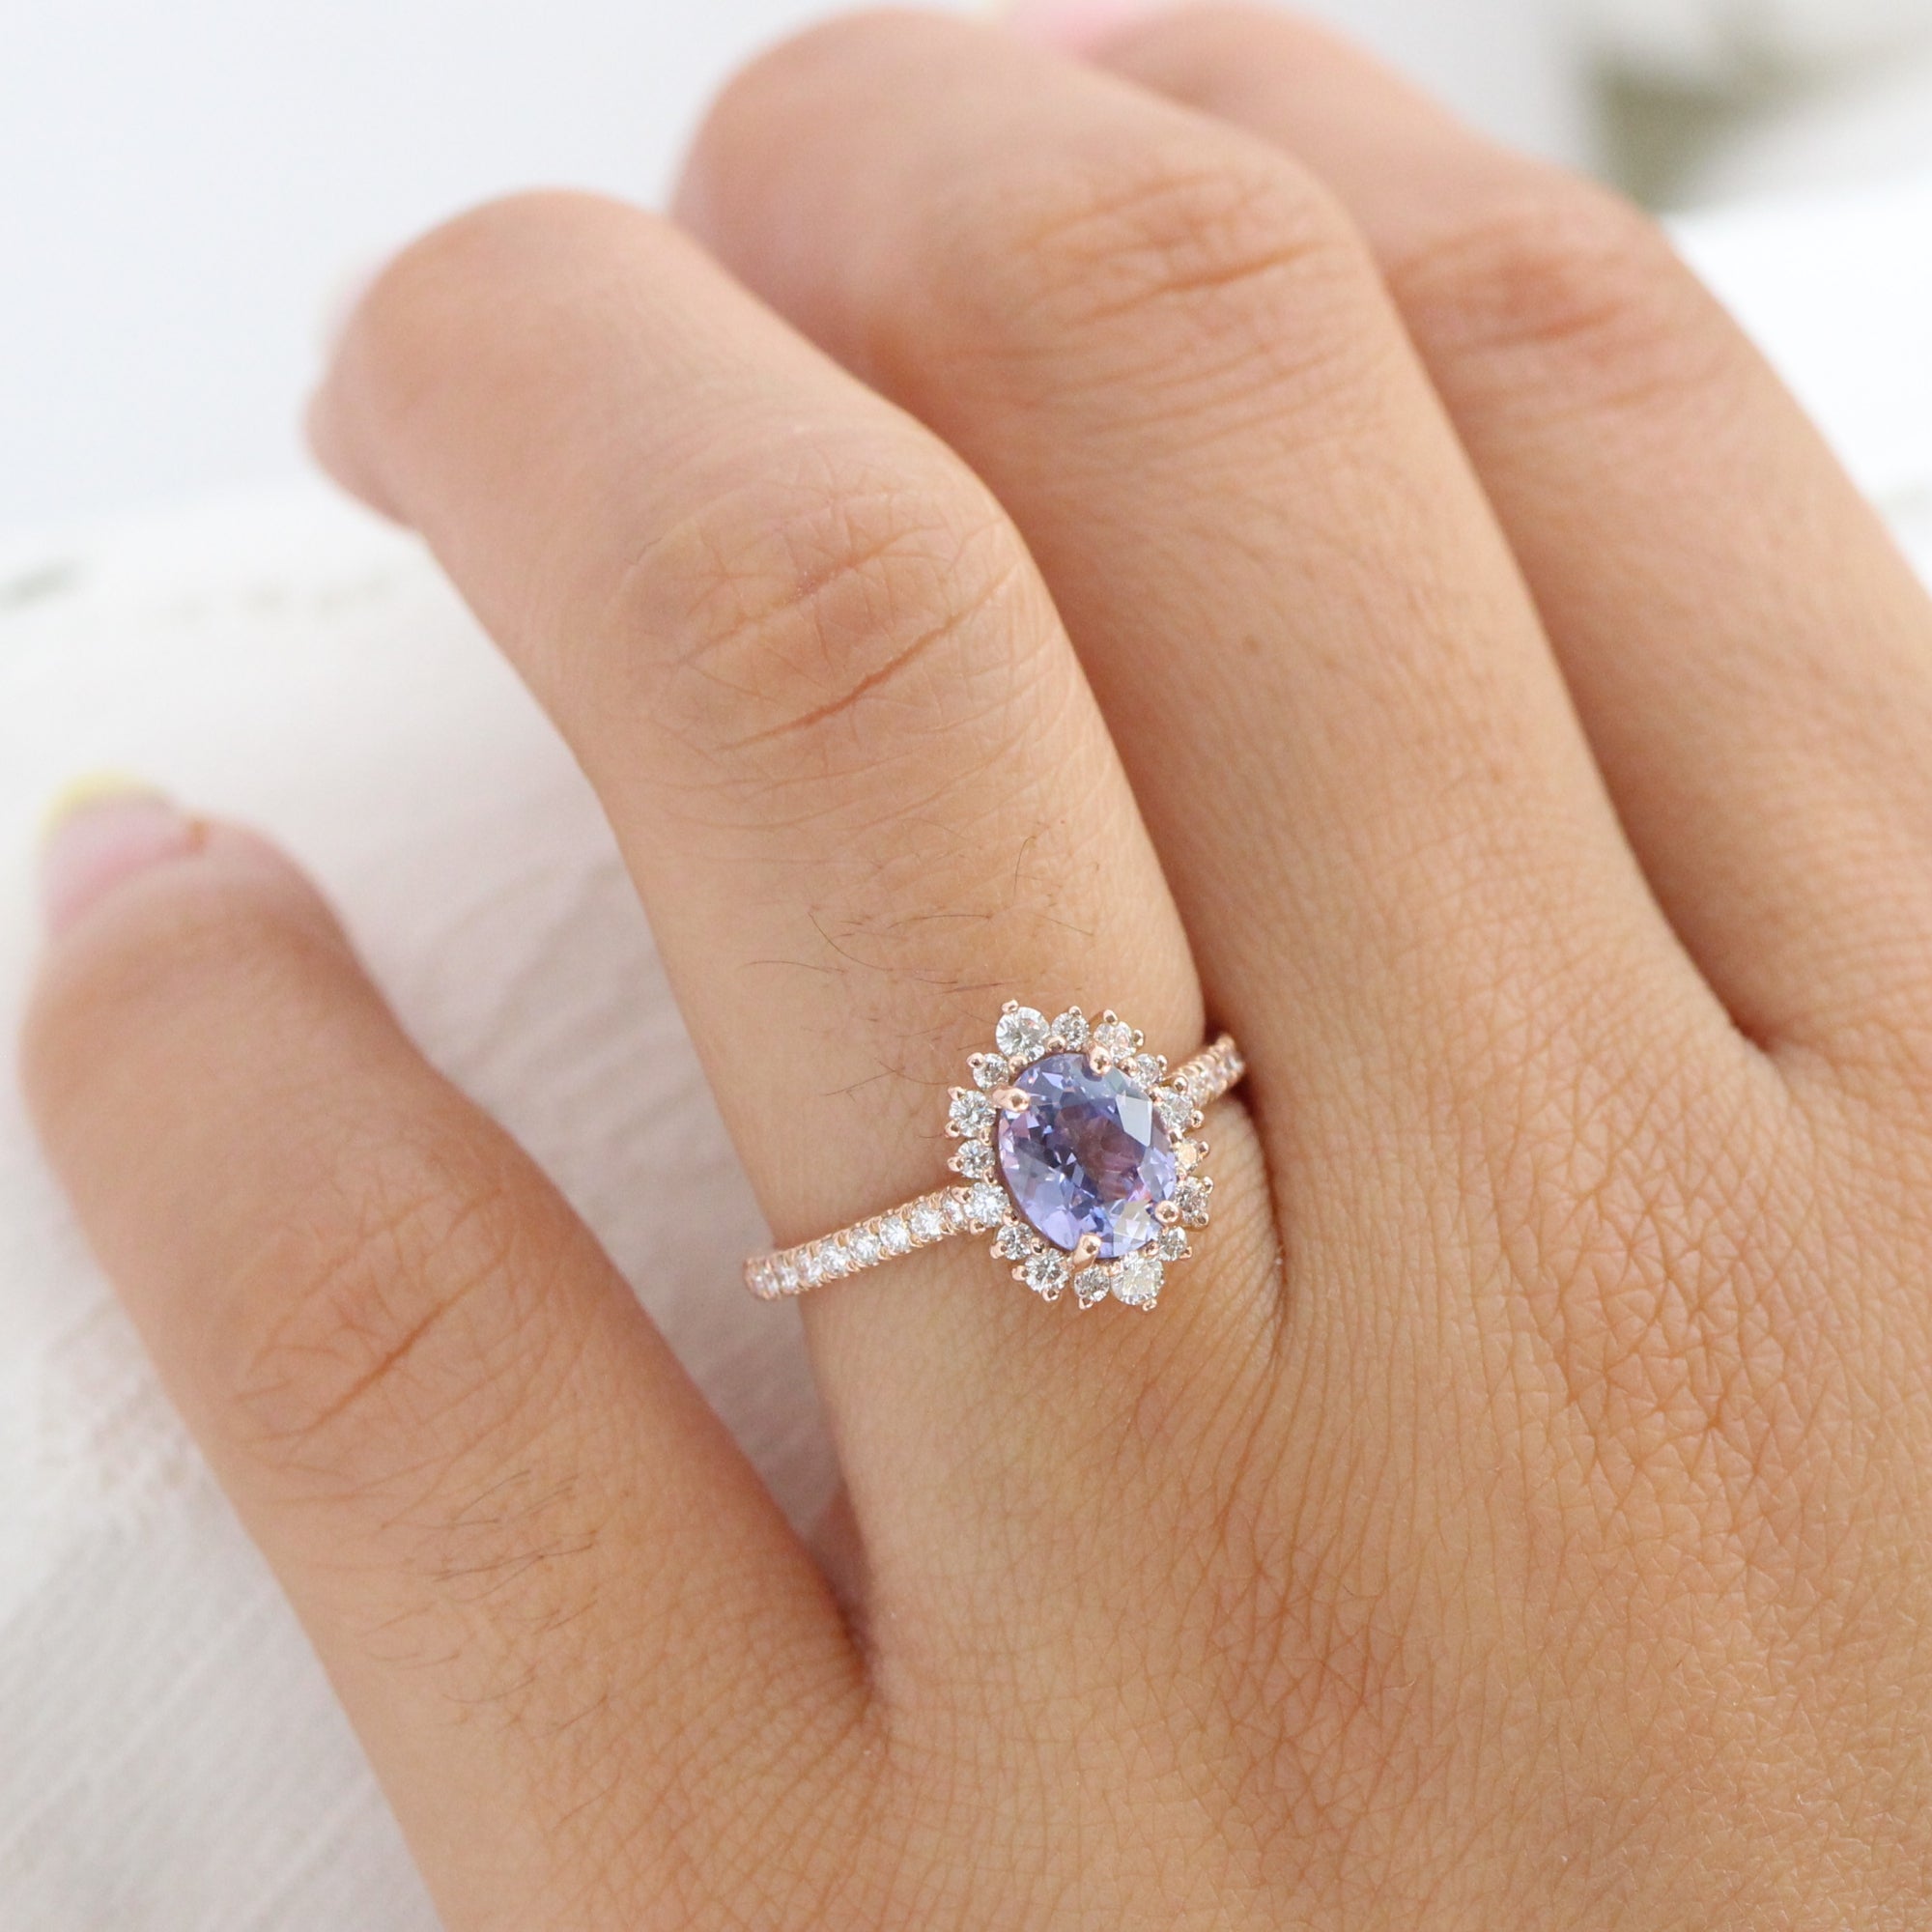 Lavender sapphire ring rose gold halo diamond oval engagement ring la more design jewelry